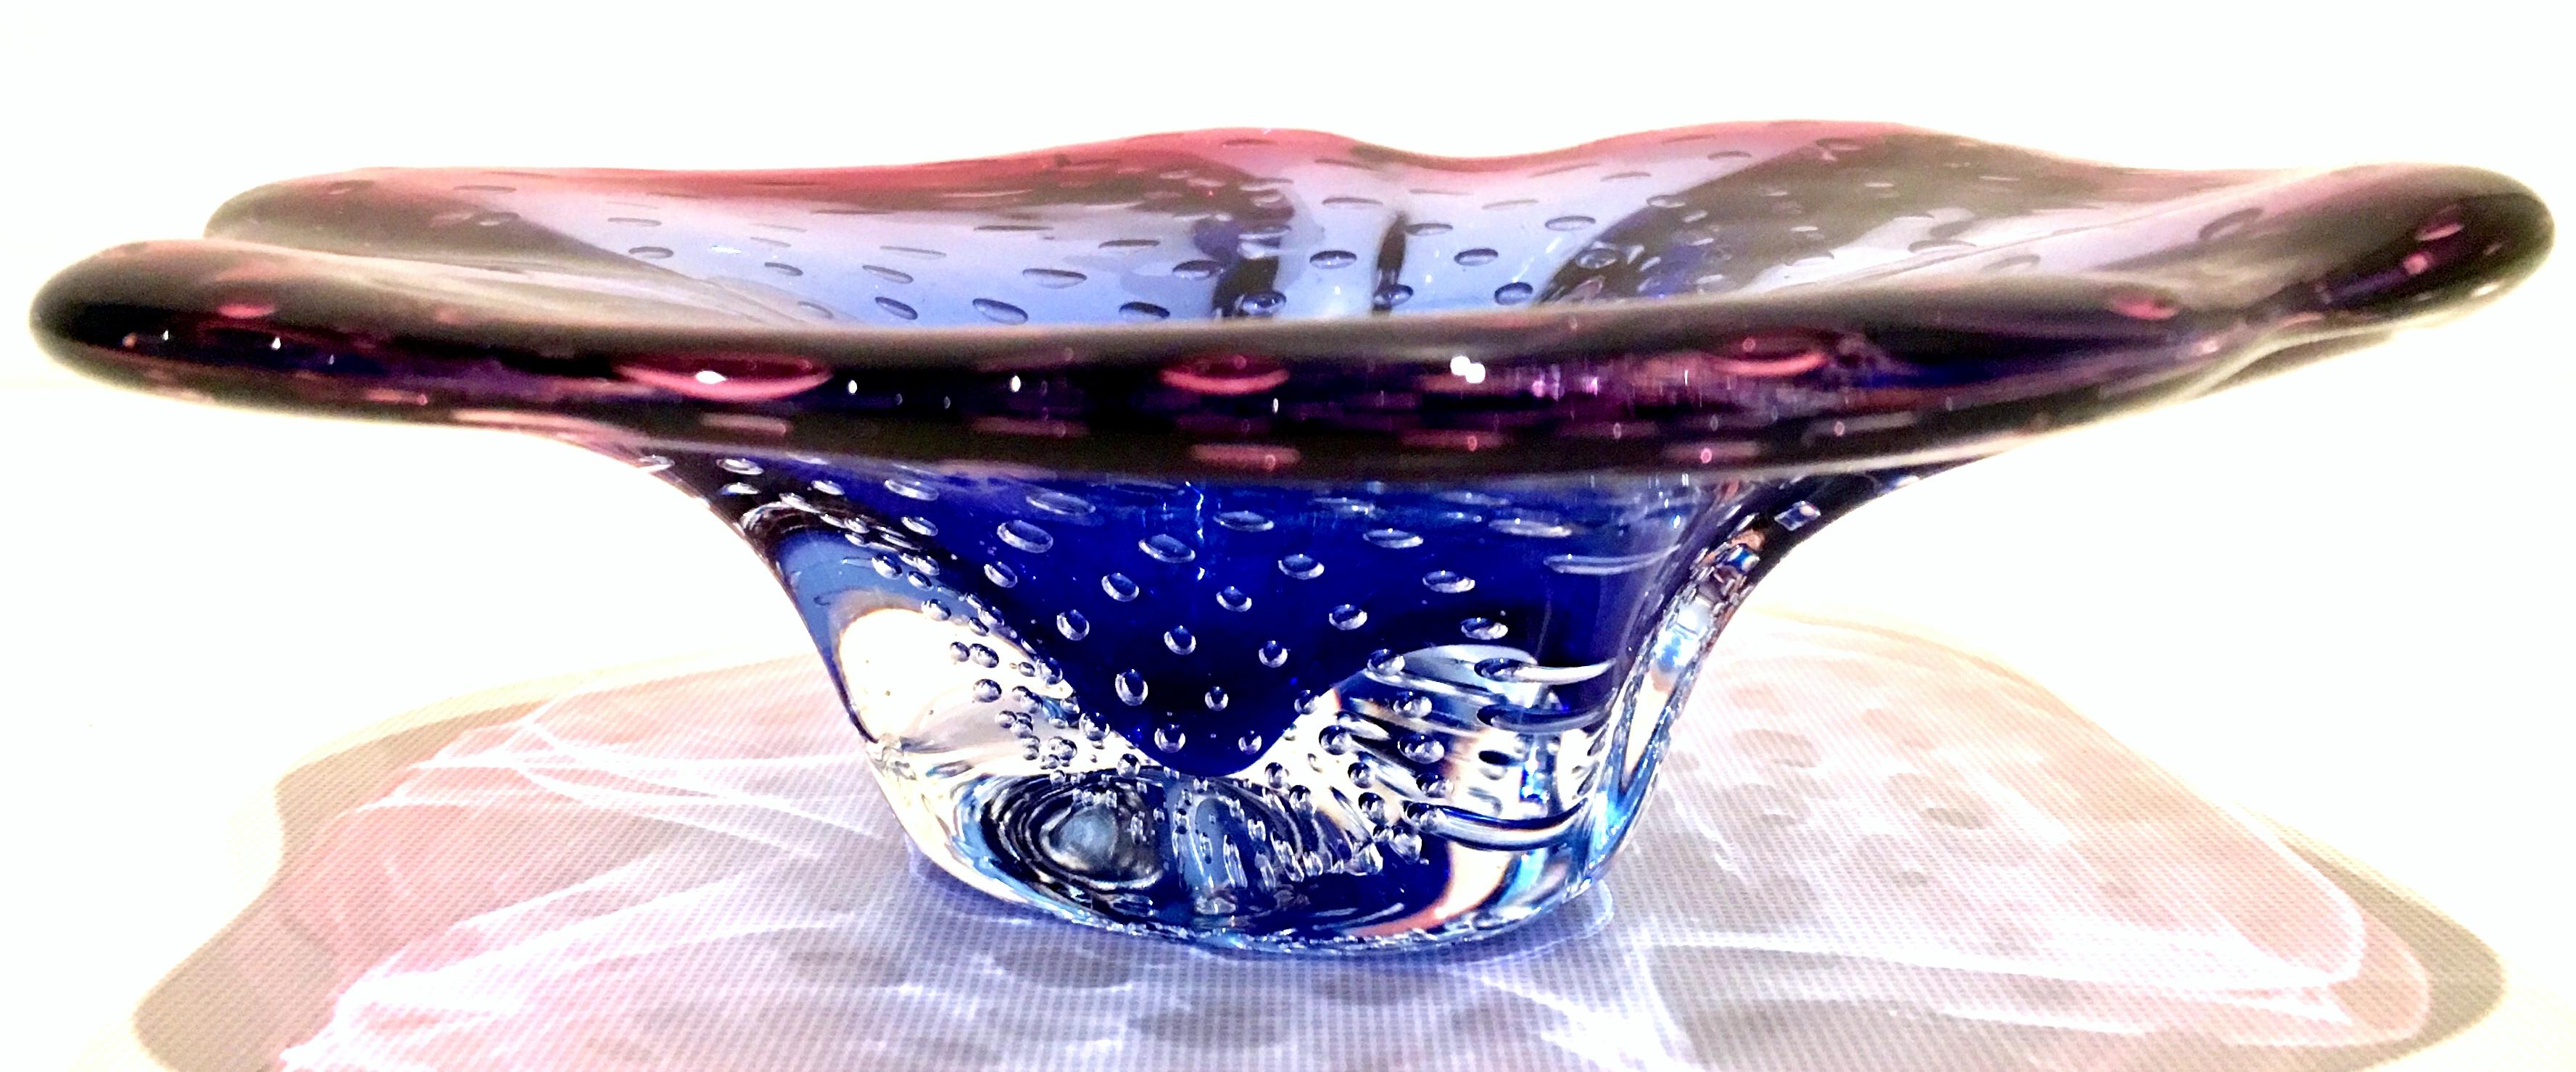 20th century organic modern Italian Murano glass two-tone sculptural bowl. This one of a kind piece of sculptural art features 